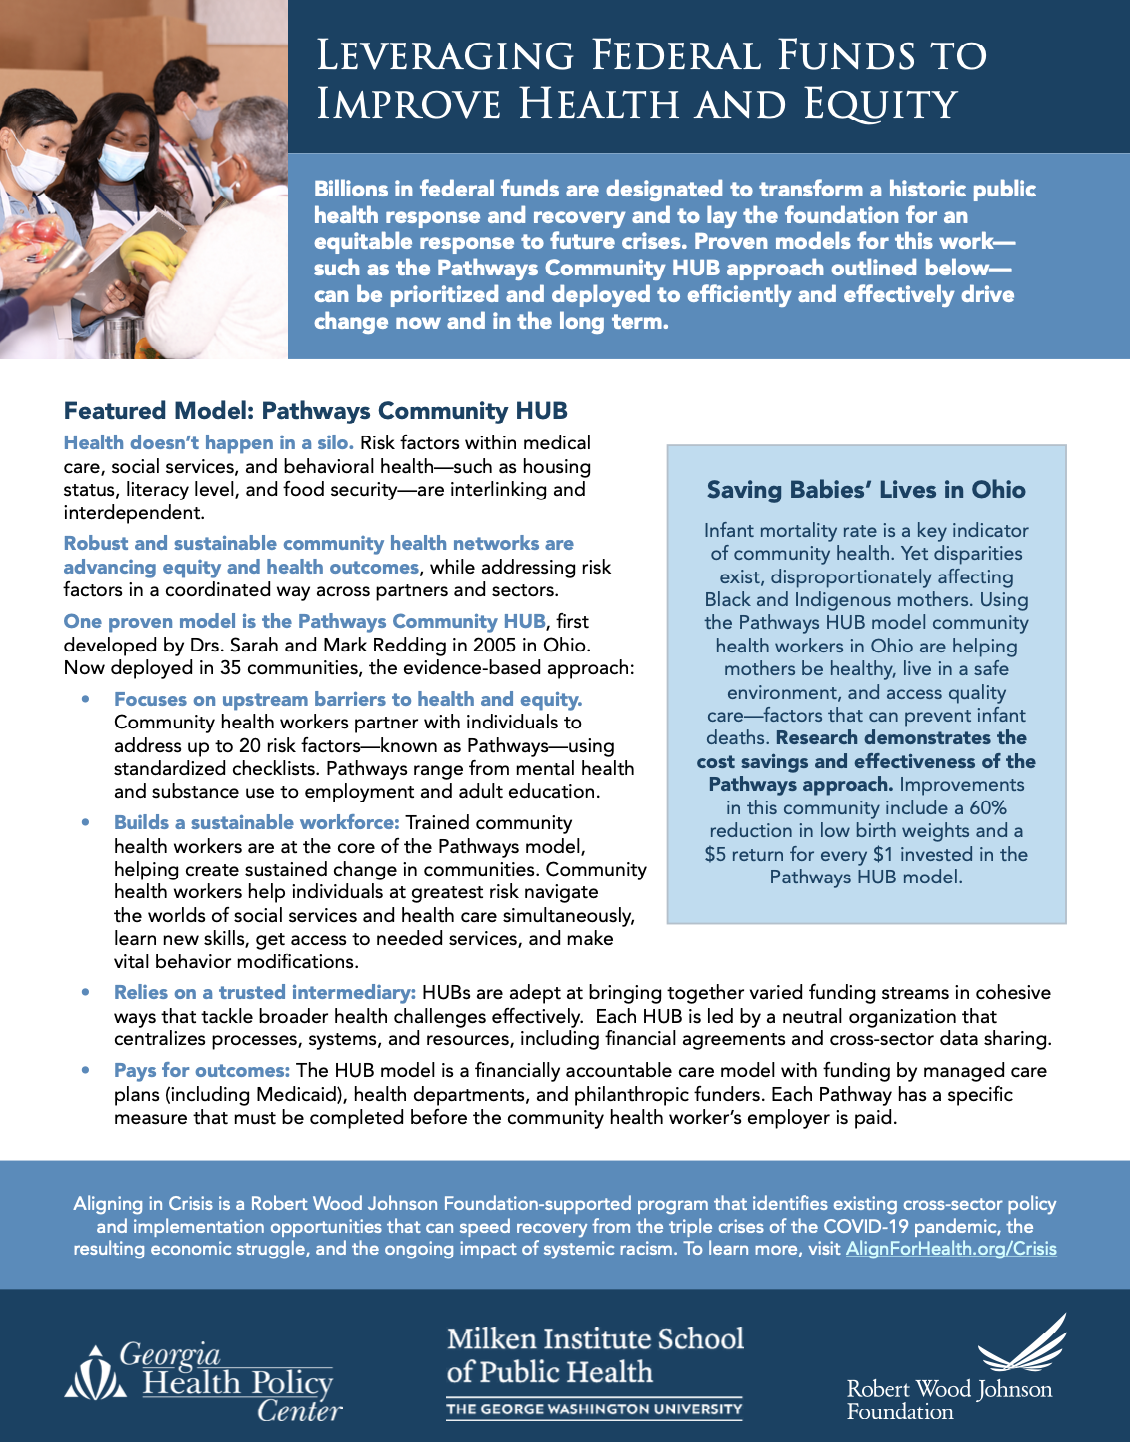 Leveraging Federal Funds to Improve Health and Equity: Pathways Community HUB Model